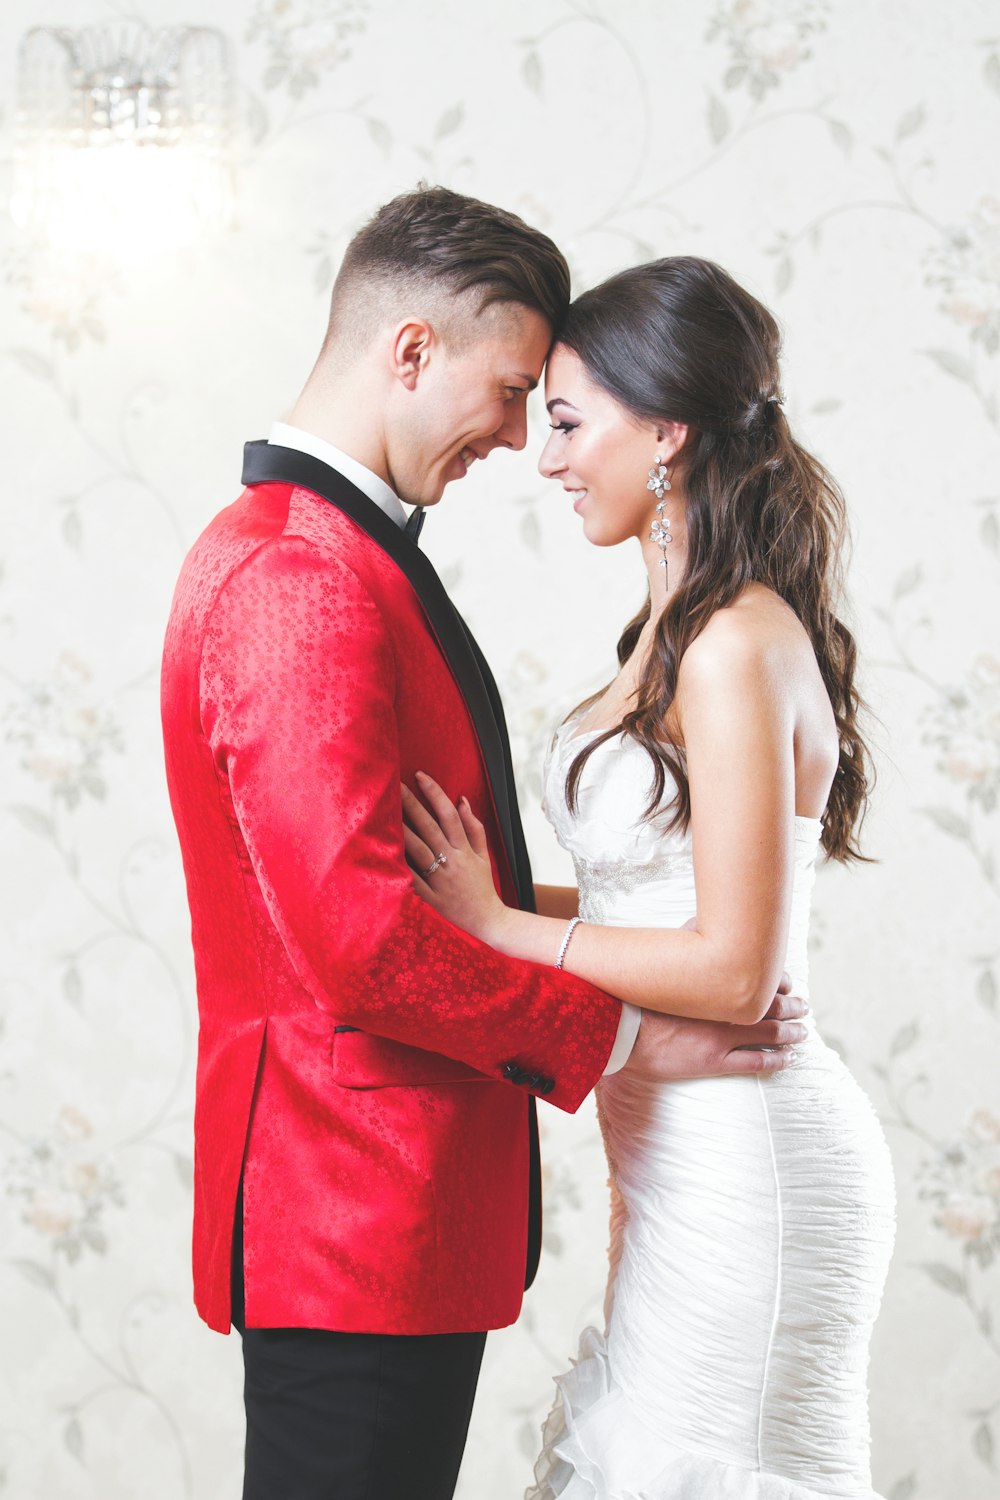 man in red suit kissing woman in white dress